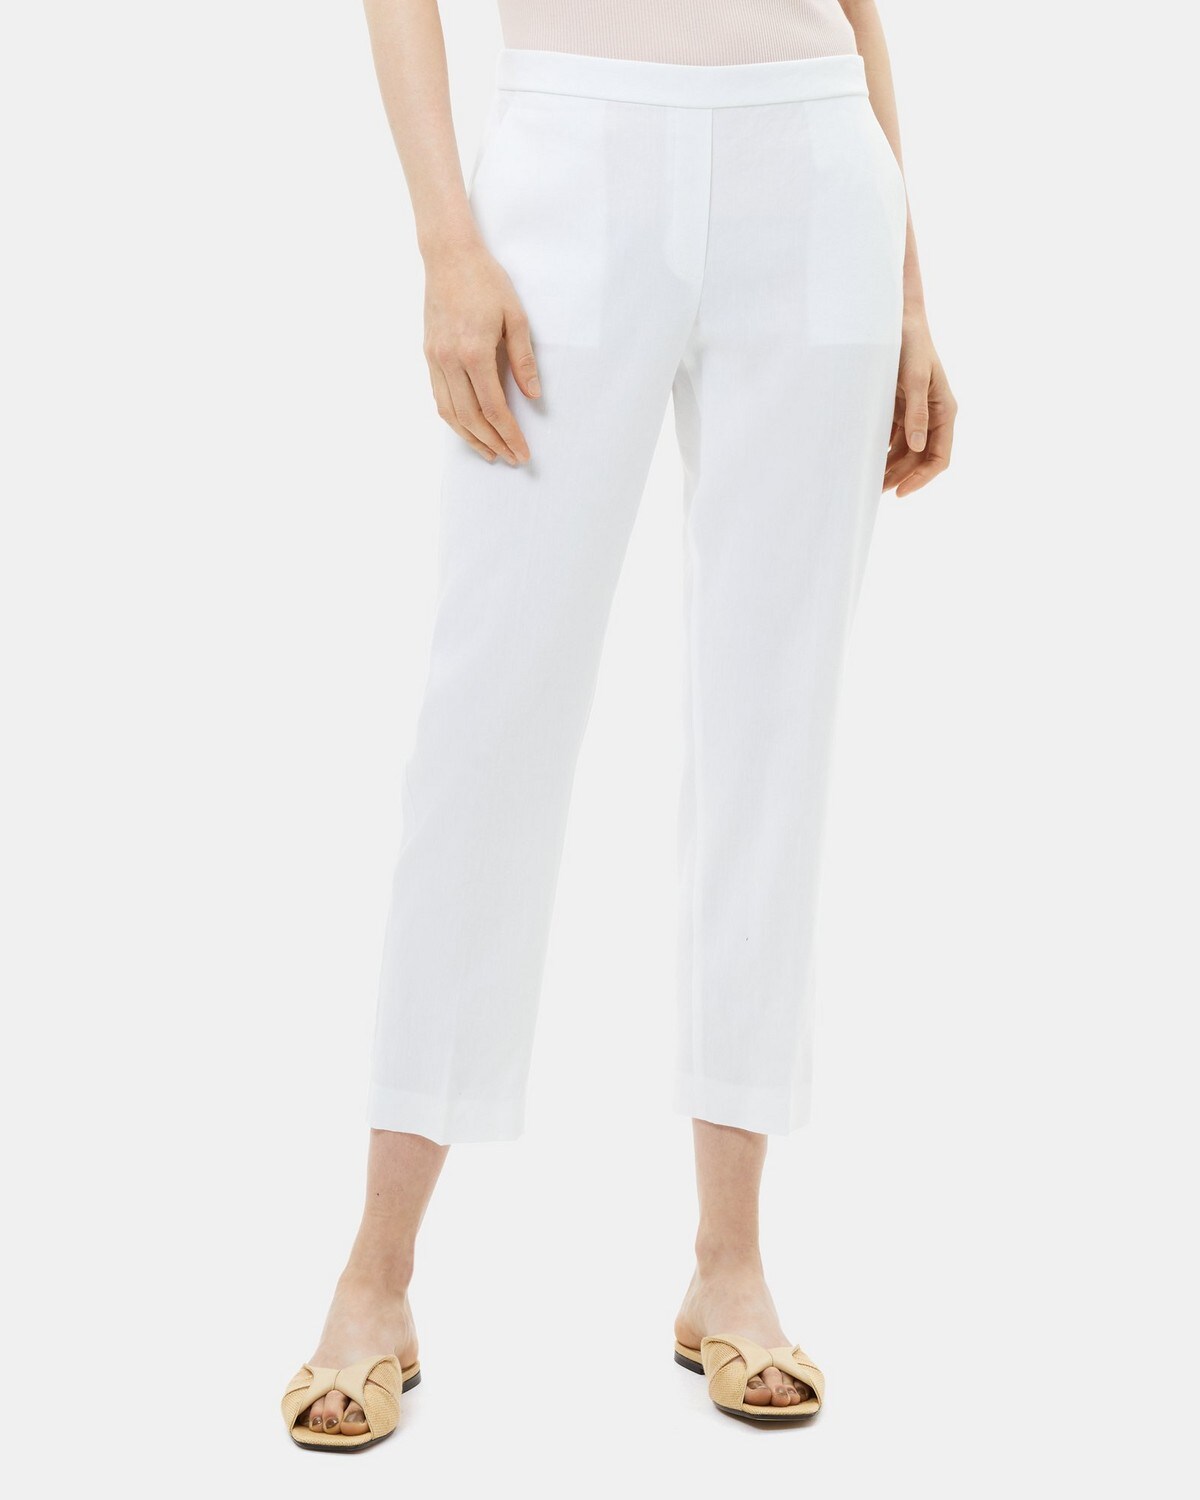 Slim Cropped Pull-On Pant in Linen